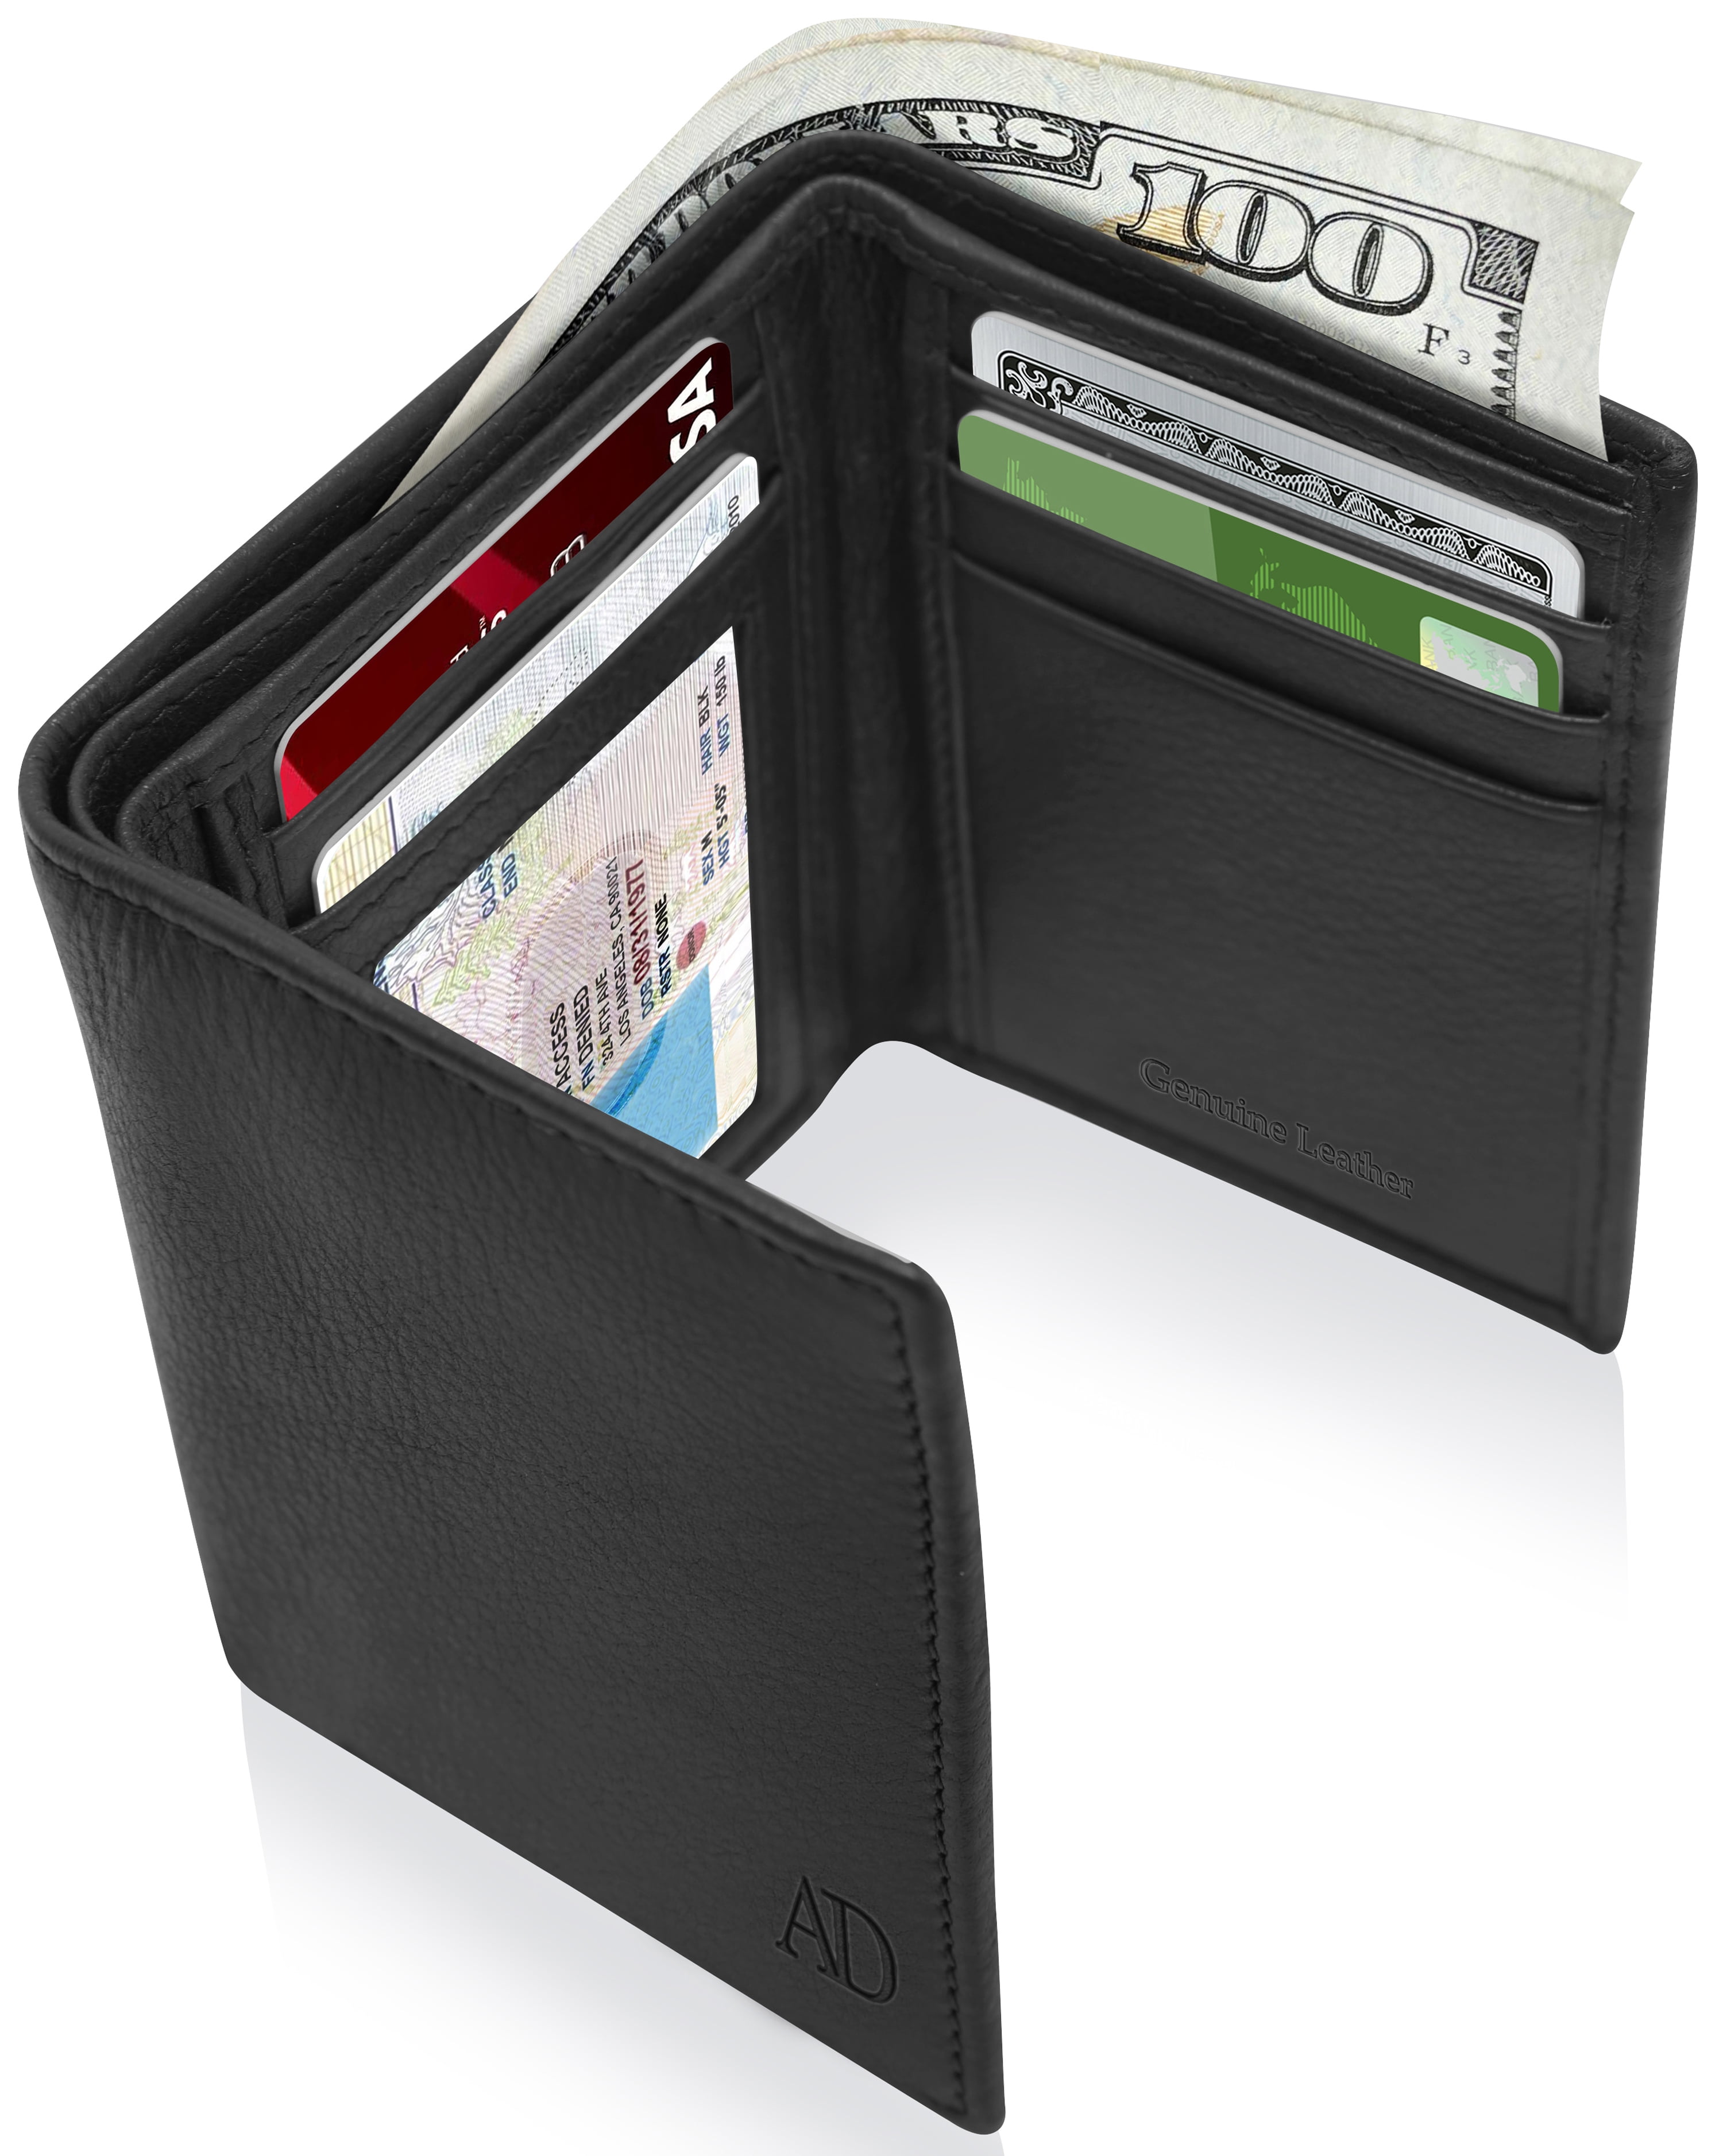 Hot Latest Trifold Wallets for Men Real Protected Front Pocket Travel Wallet 